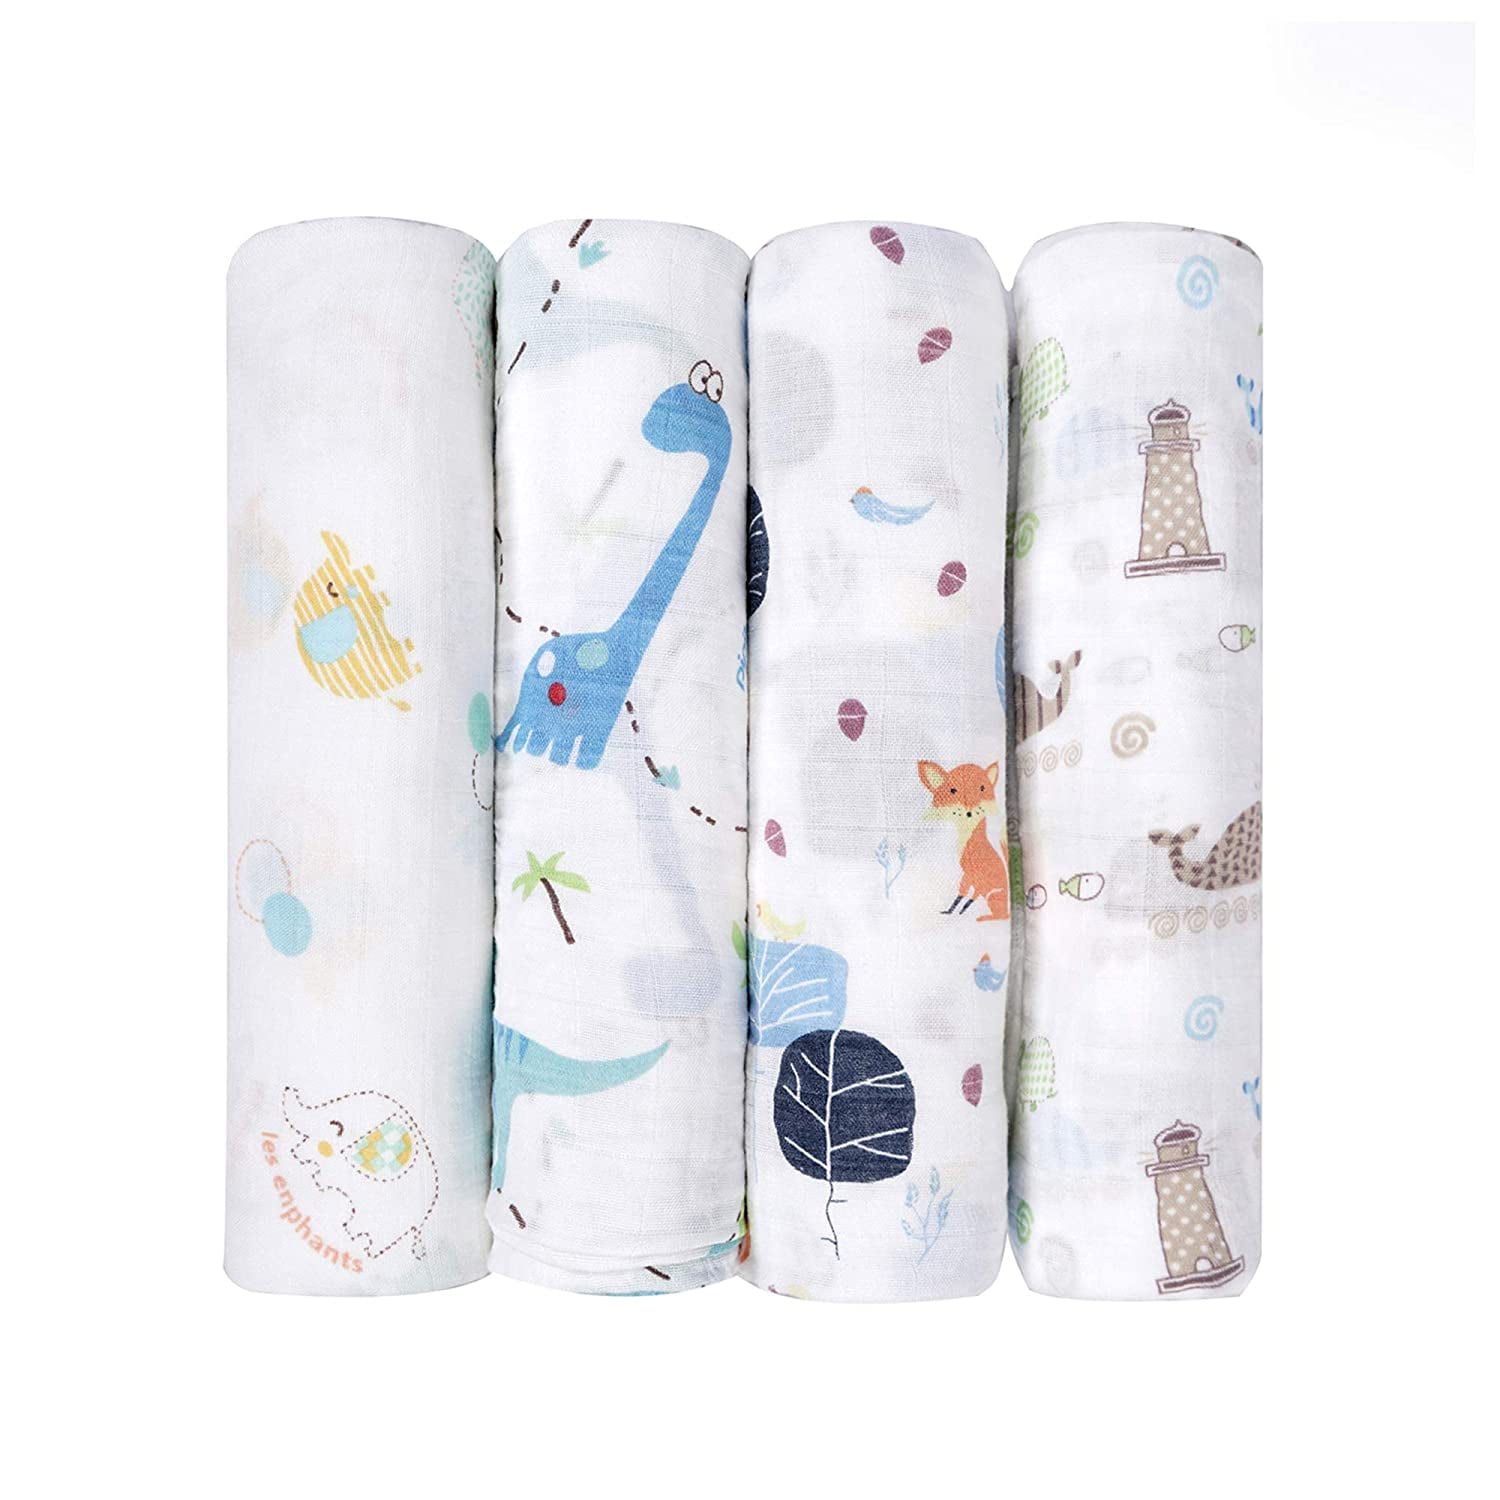 70% Bamboo 30% Cotton Receiving Blanket Swaddle Wrap with Gift Box 47 X 47 inch Viviland Baby Muslin Swaddle Blanket for Newborn Boys and Girls Elephant,Fox,Whale,Dinosaur 4 Packs 